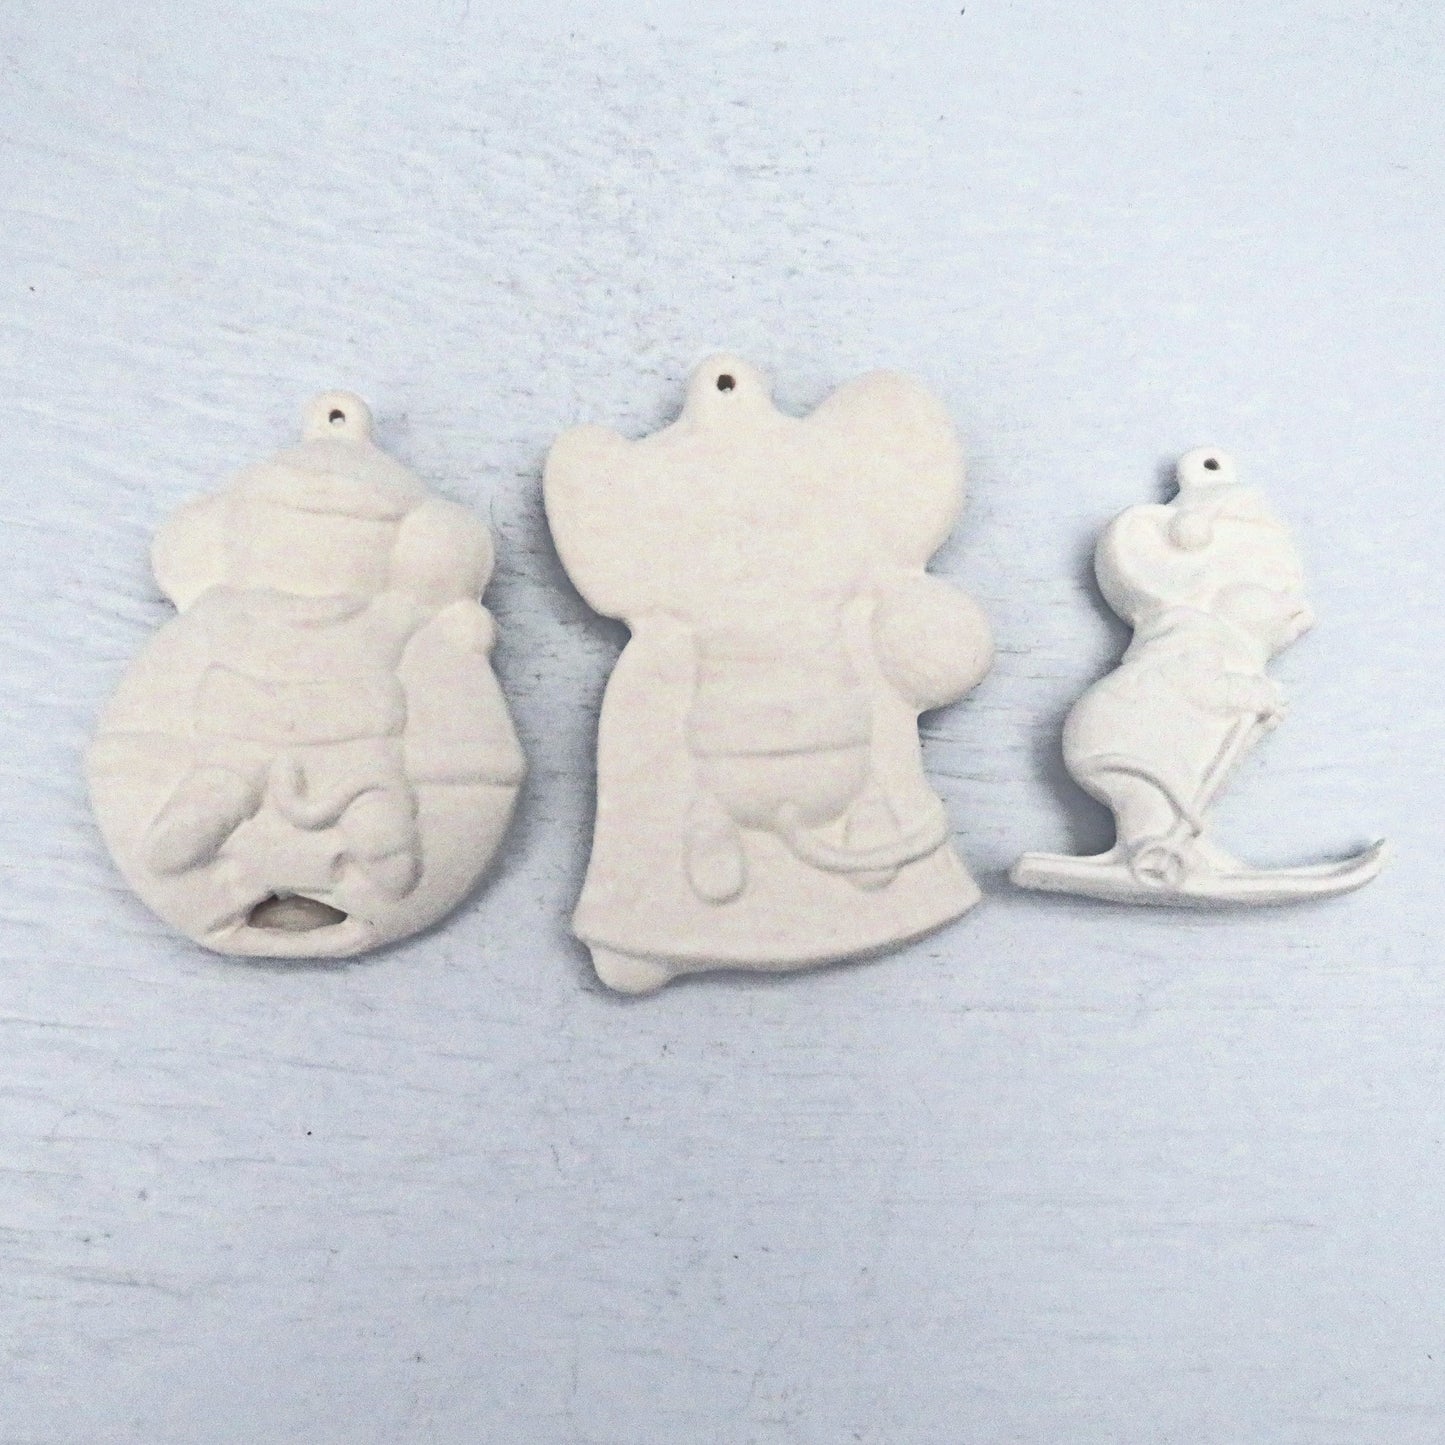 Handmade Ready to Paint Set of 3 Mouse Christmas Ornaments